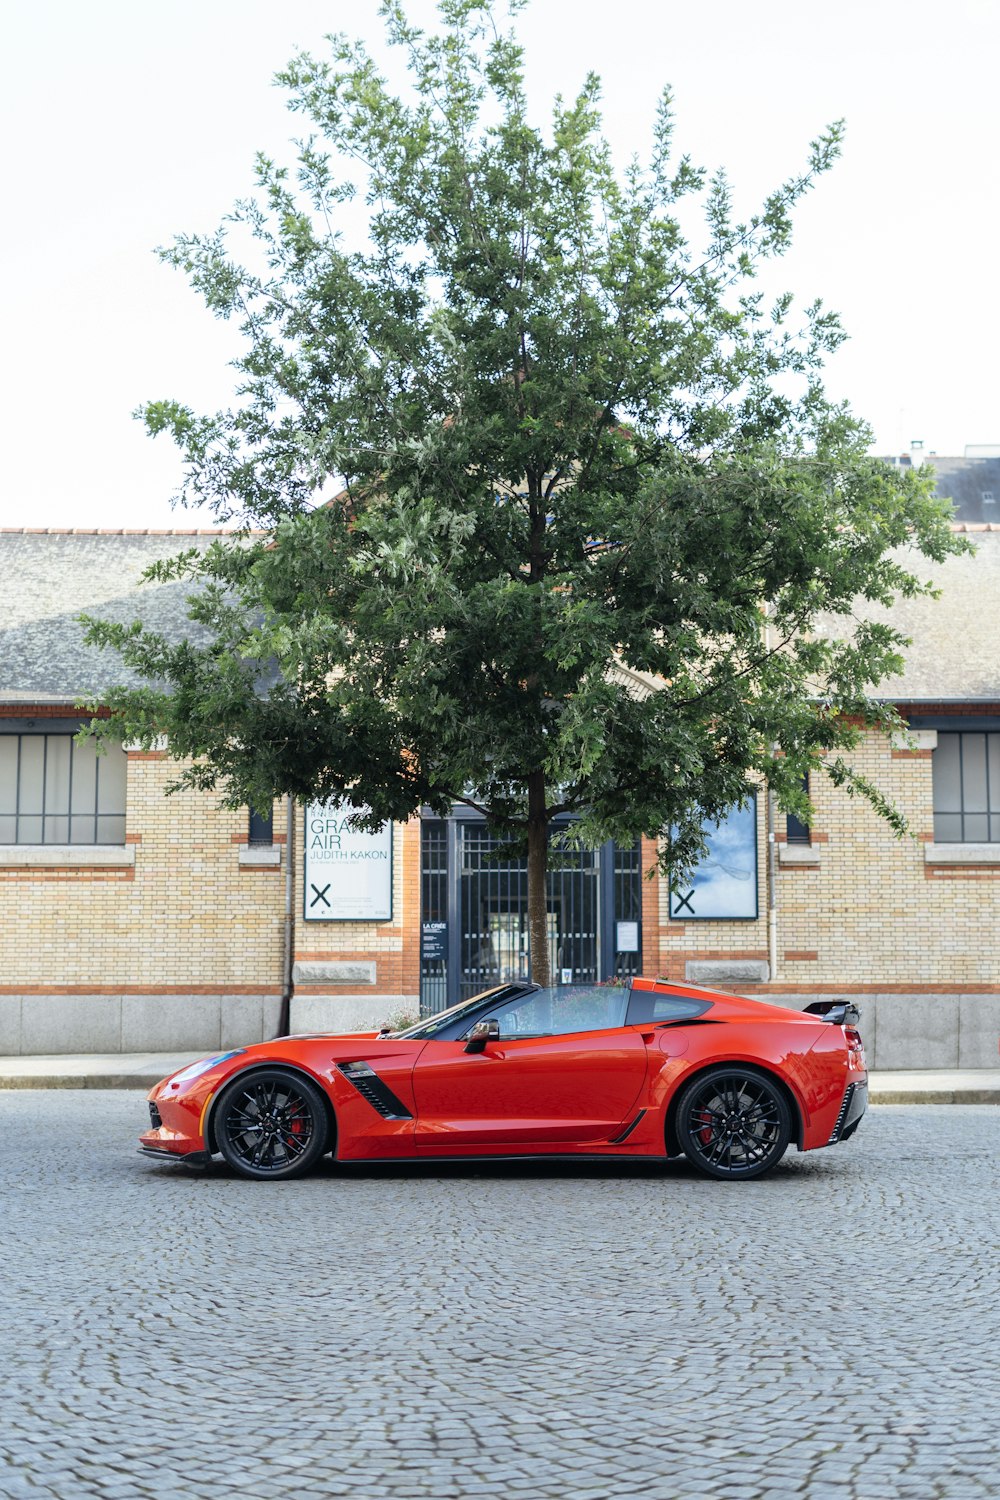 a red sports car parked in front of a tree